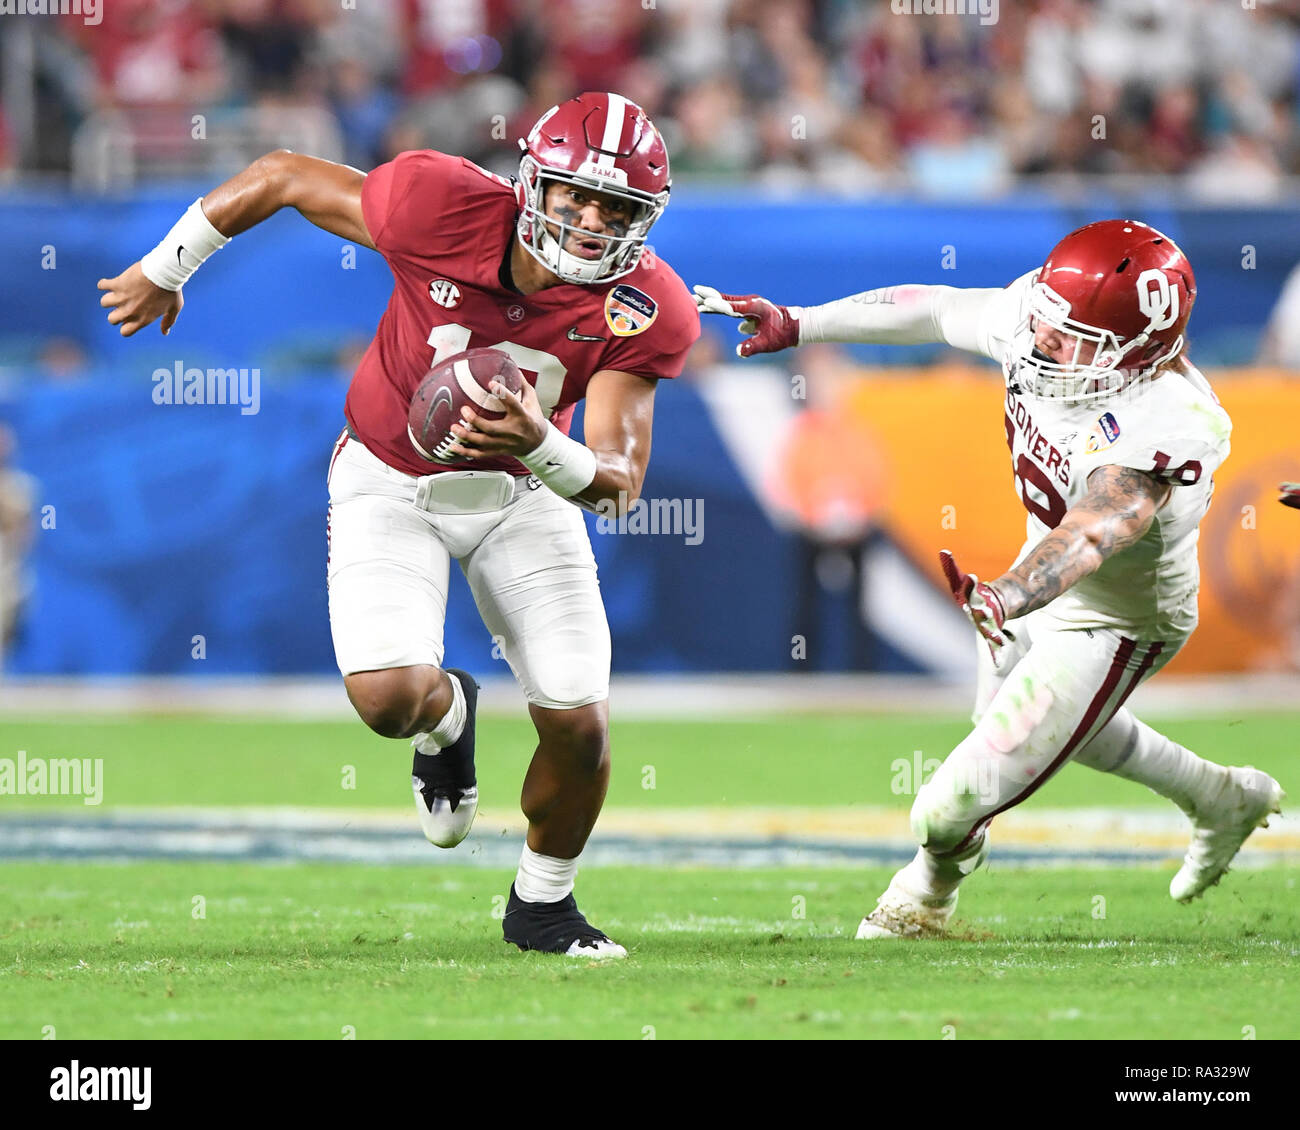 Alabama Crimson Tide quarterback Tua Tagovailoa (13) hands off to Alabama  Crimson Tide running back Josh Jacobs (8) in the fourth quarter during the  college football playoff semifinal at the Capital One